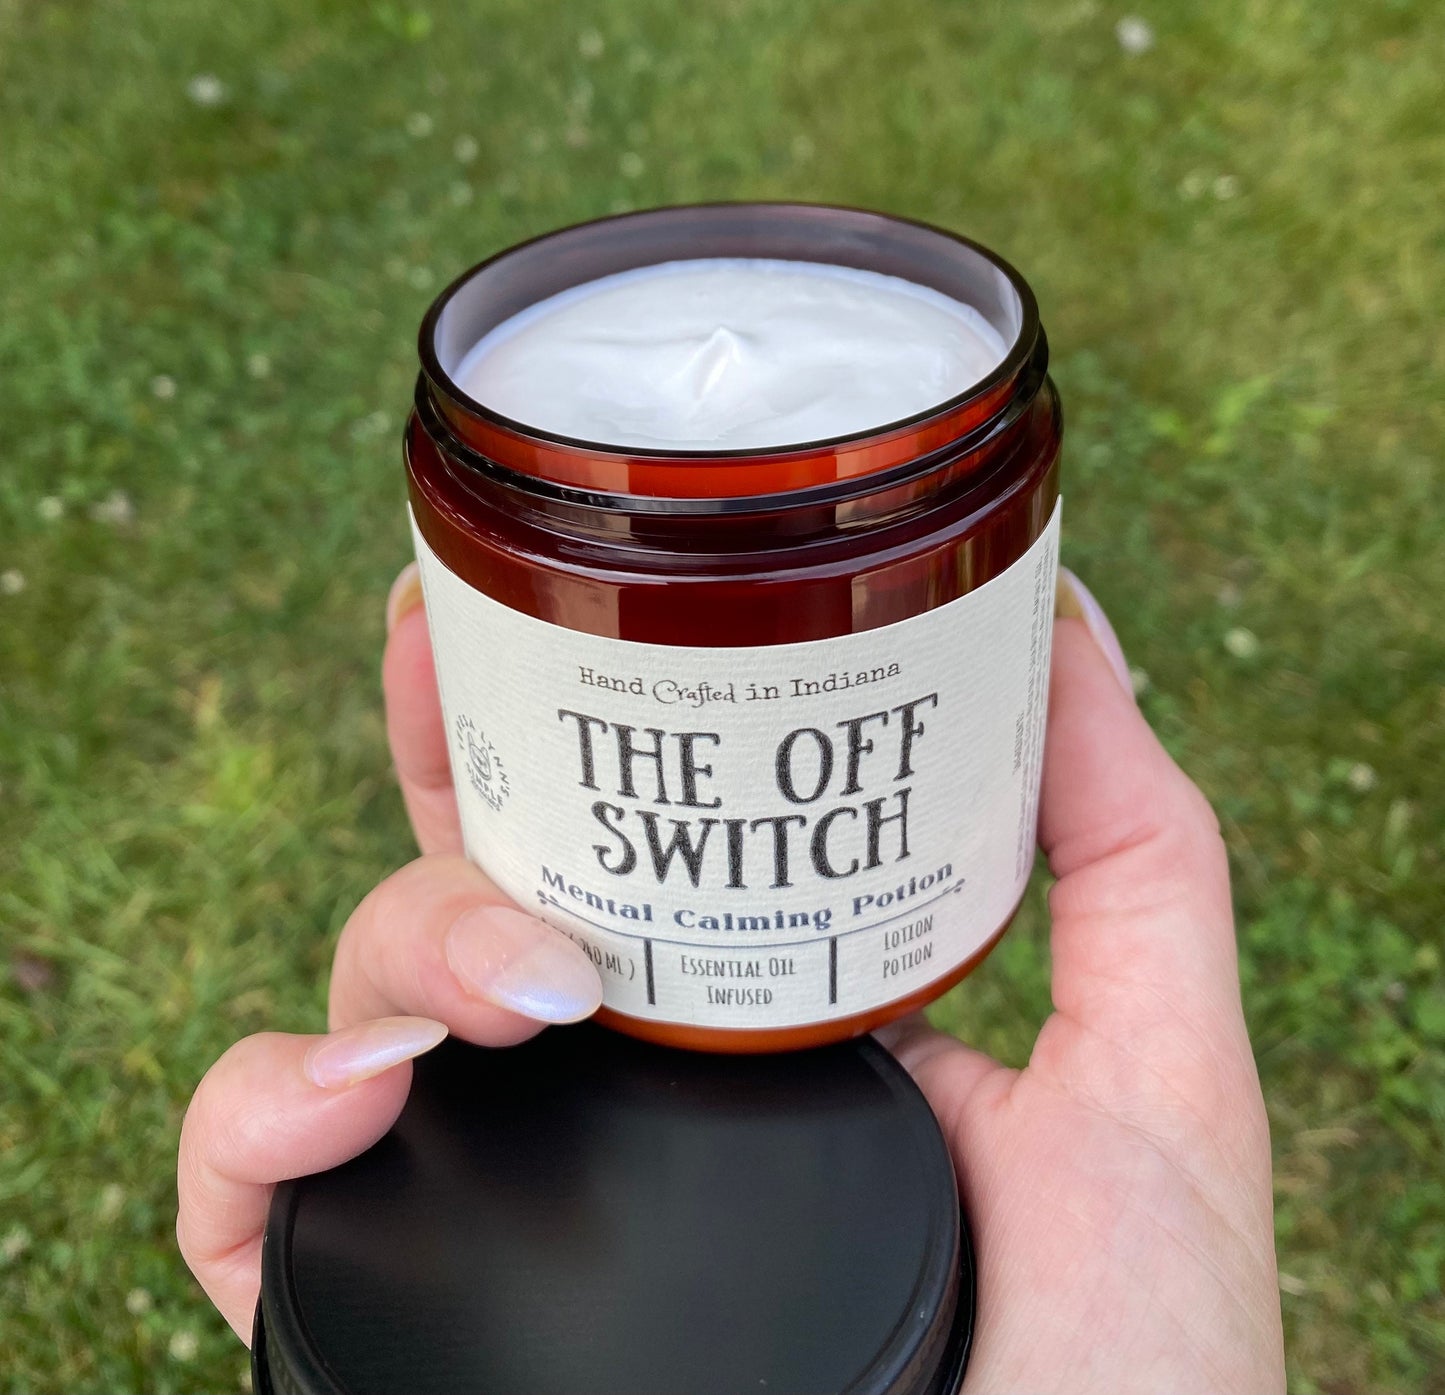 The Off Switch Skincare, Sleep balm, dream enhancer, essential oil, Shea butter, homeopathic, natural, Roller Ball, lotion